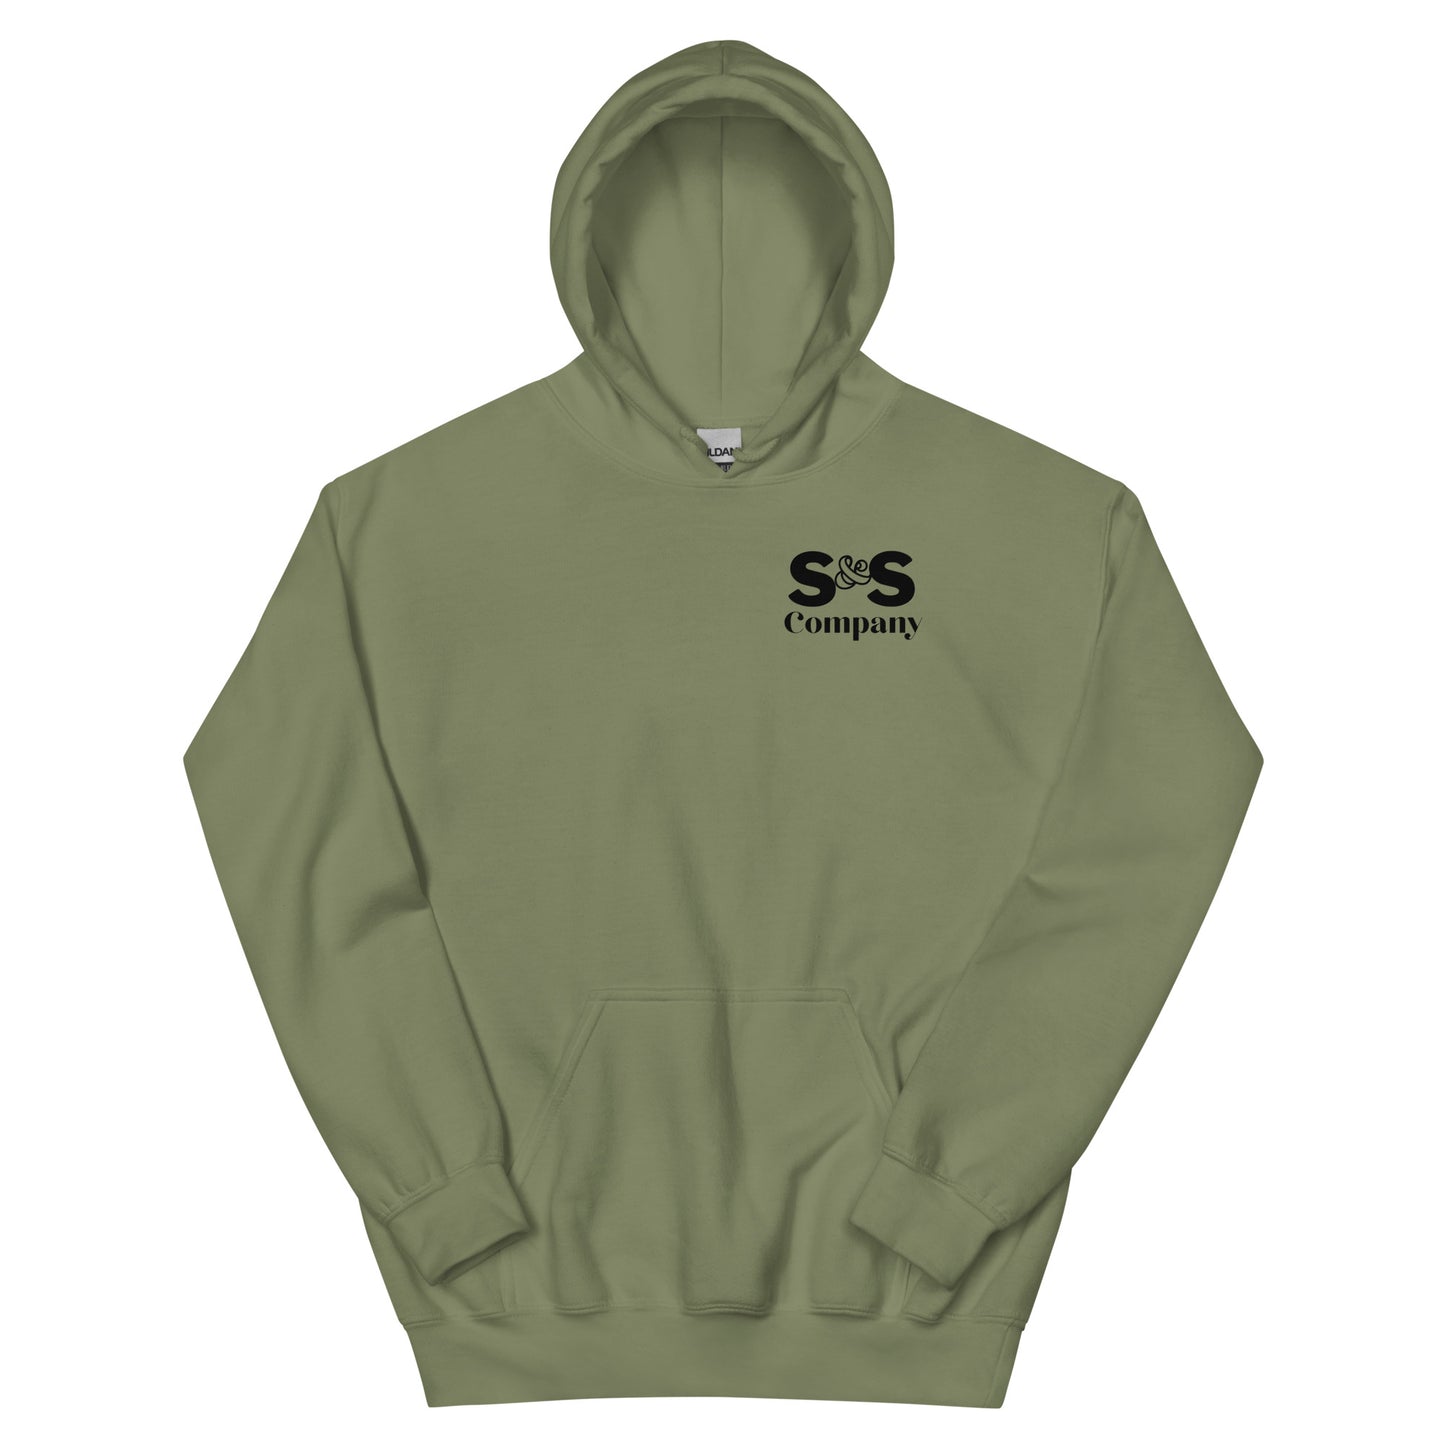 MENS HOODIE- DON'T BITE THE HAND